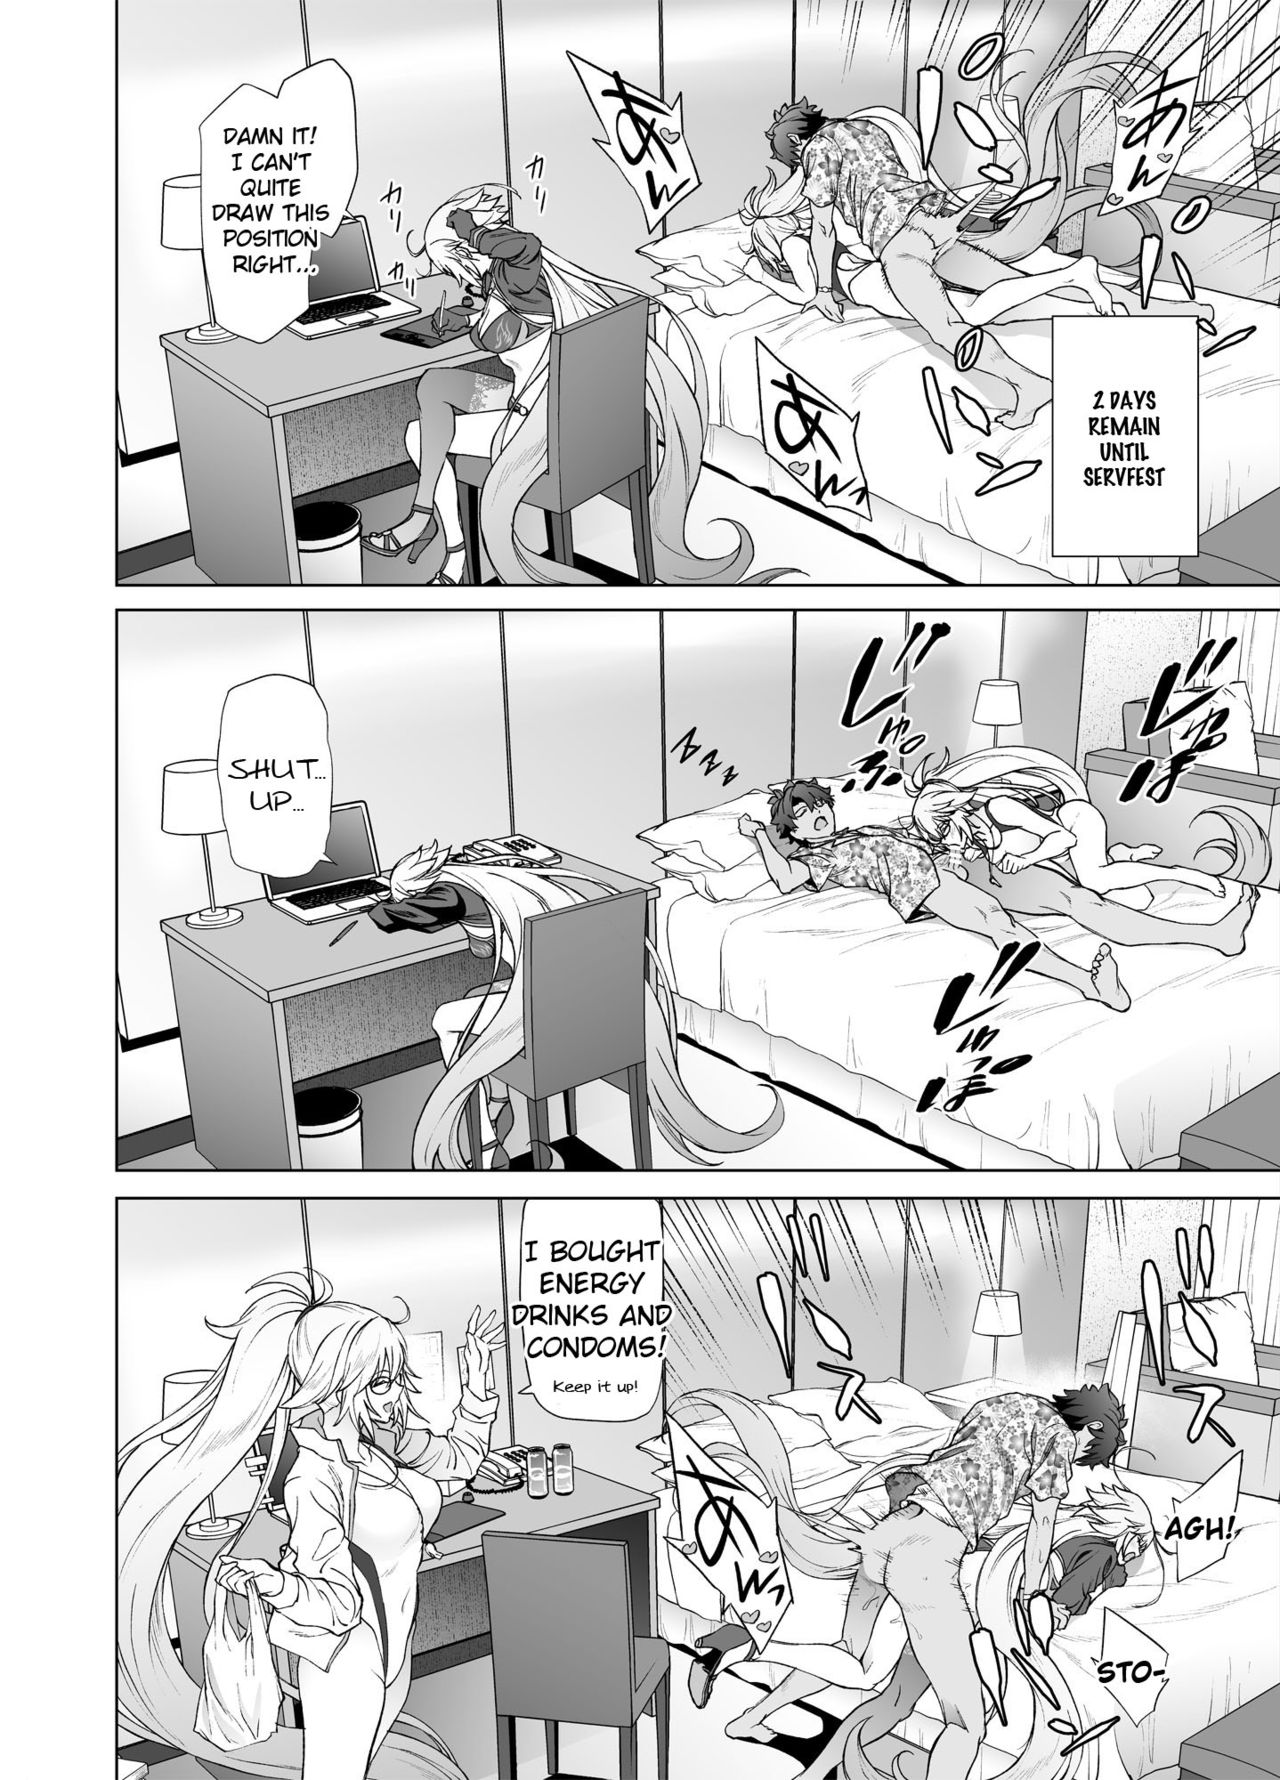 [EXTENDED PART (Endo Yoshiki)] Jeanne W (Fate/Grand Order) [Digital] (English) page 23 full